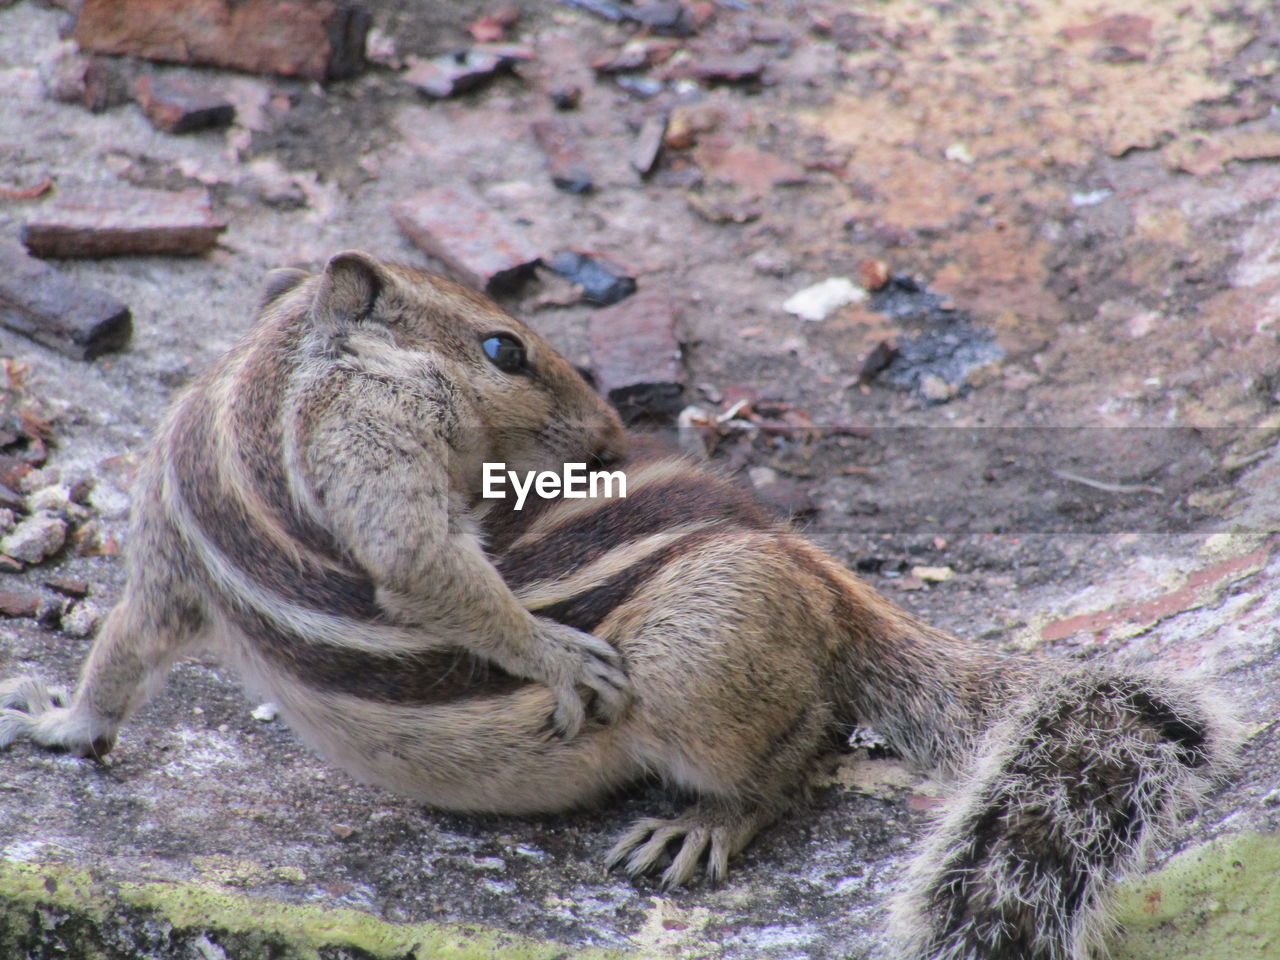 CLOSE-UP OF SQUIRREL ON ROCKS